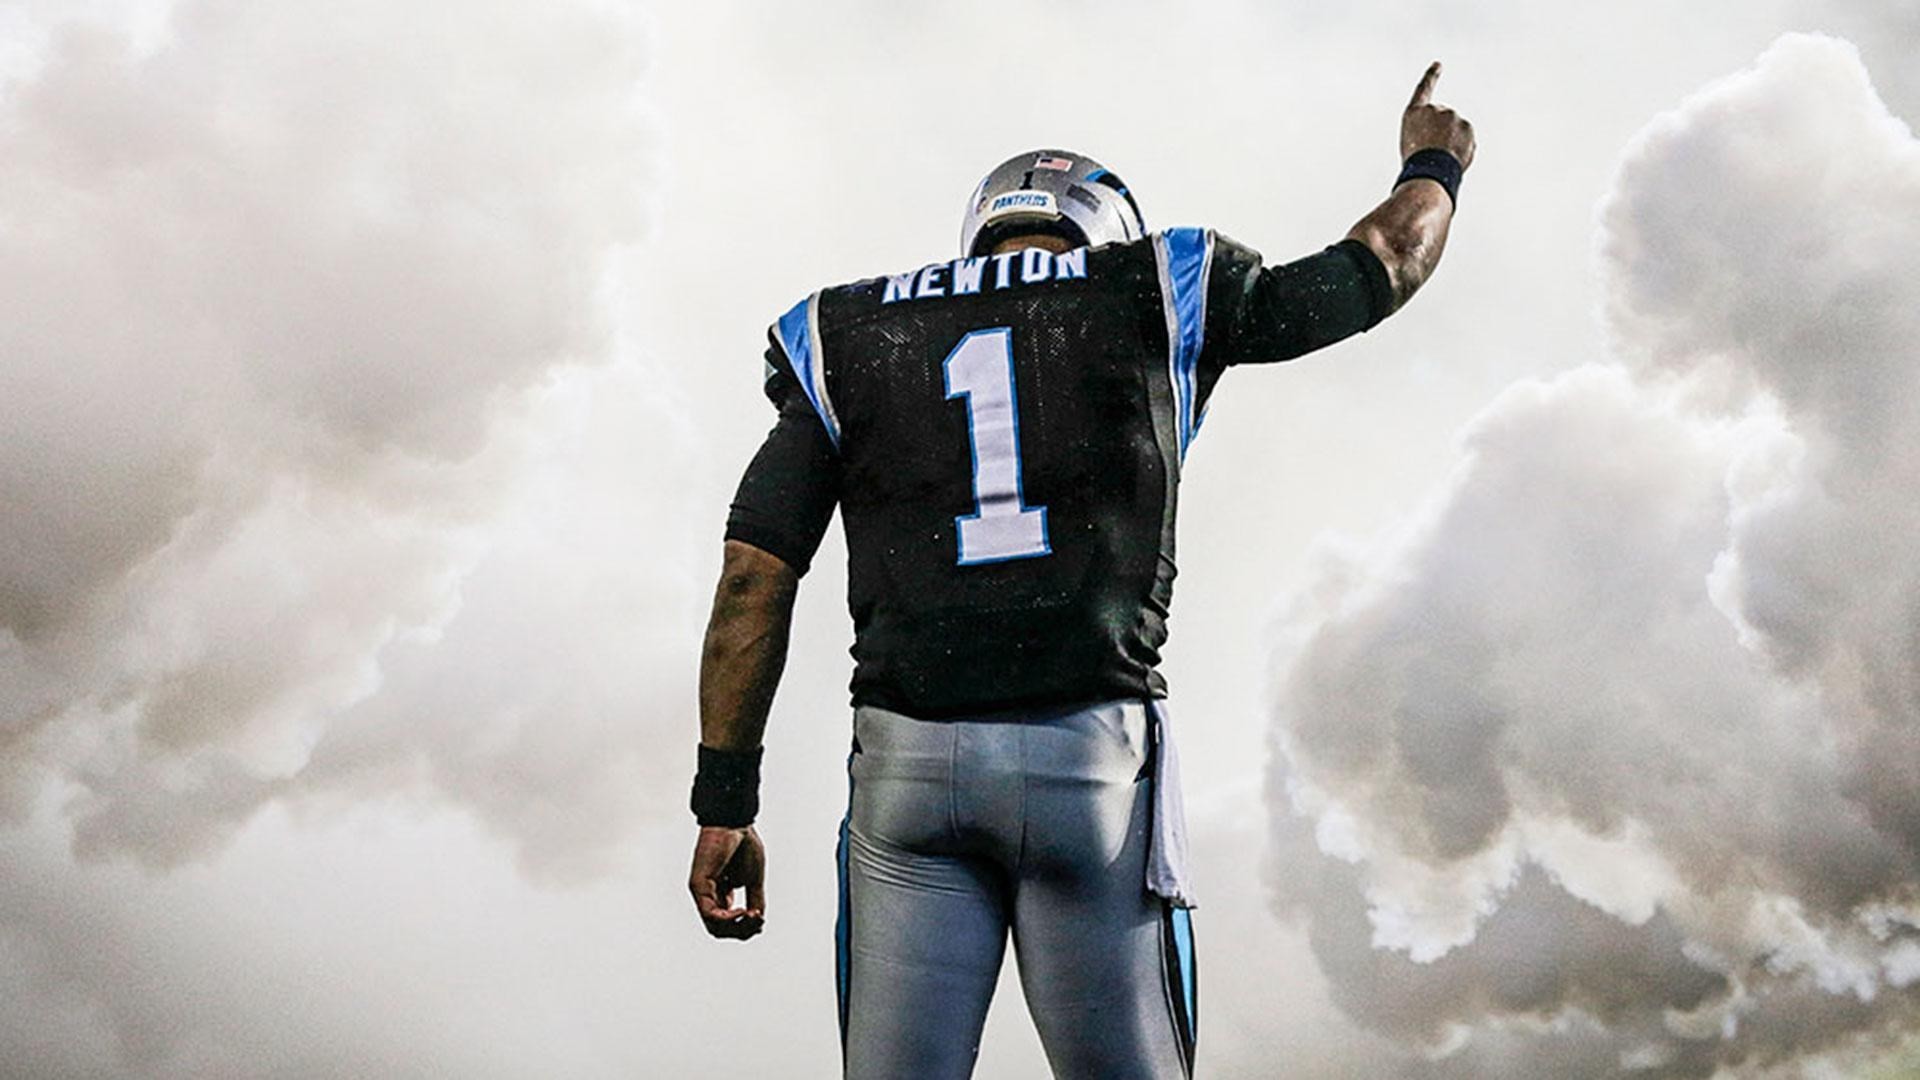 1920x1080  px Free Awesome cam newton wallpaper by Hearn Nail for : PKF